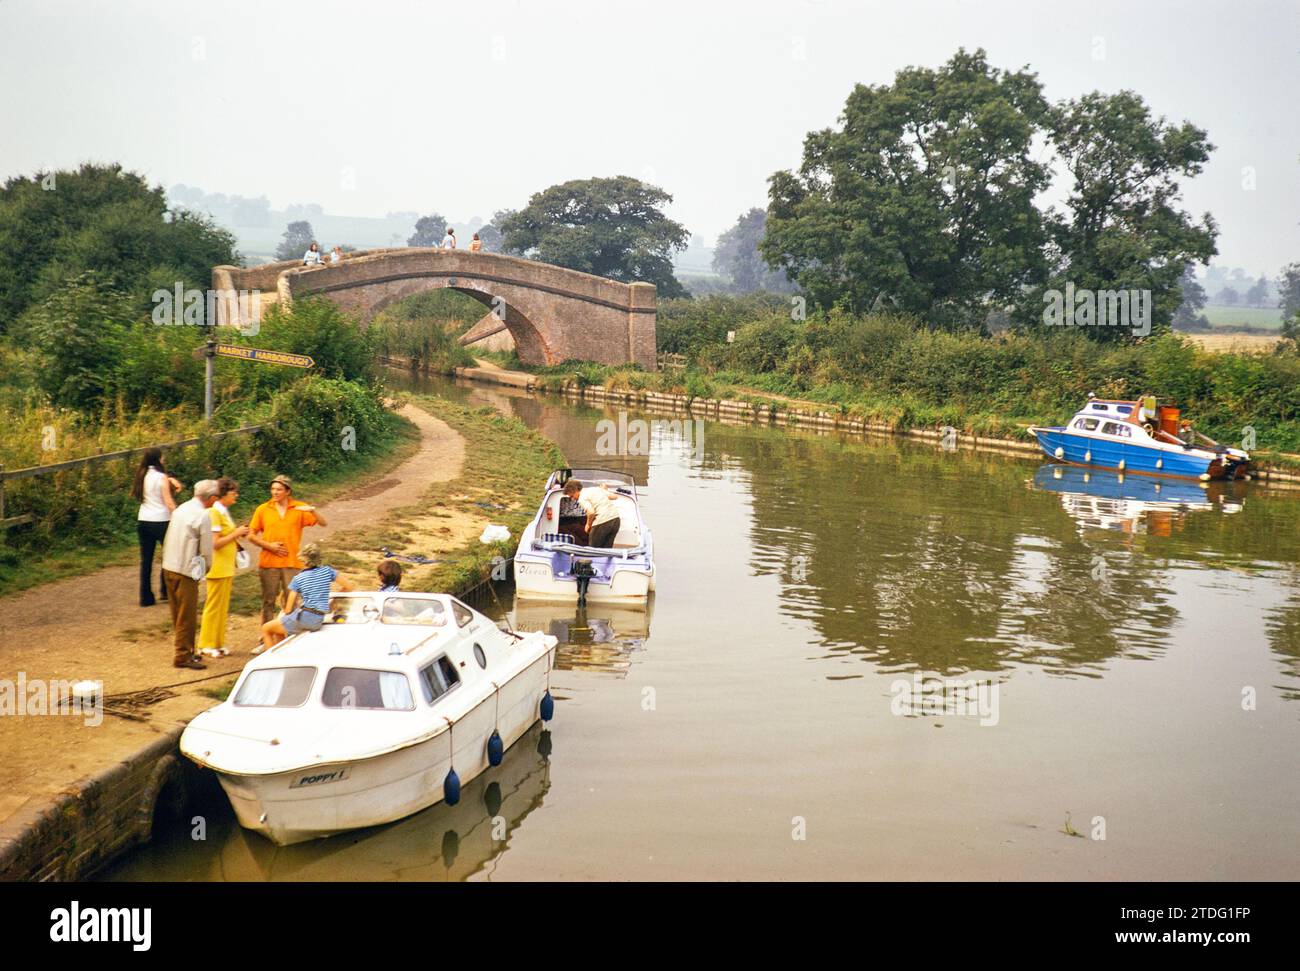 Boote auf dem Grand Union Canal, Foxton Locks, Leicestershire, England, UK August 1973 Stockfoto